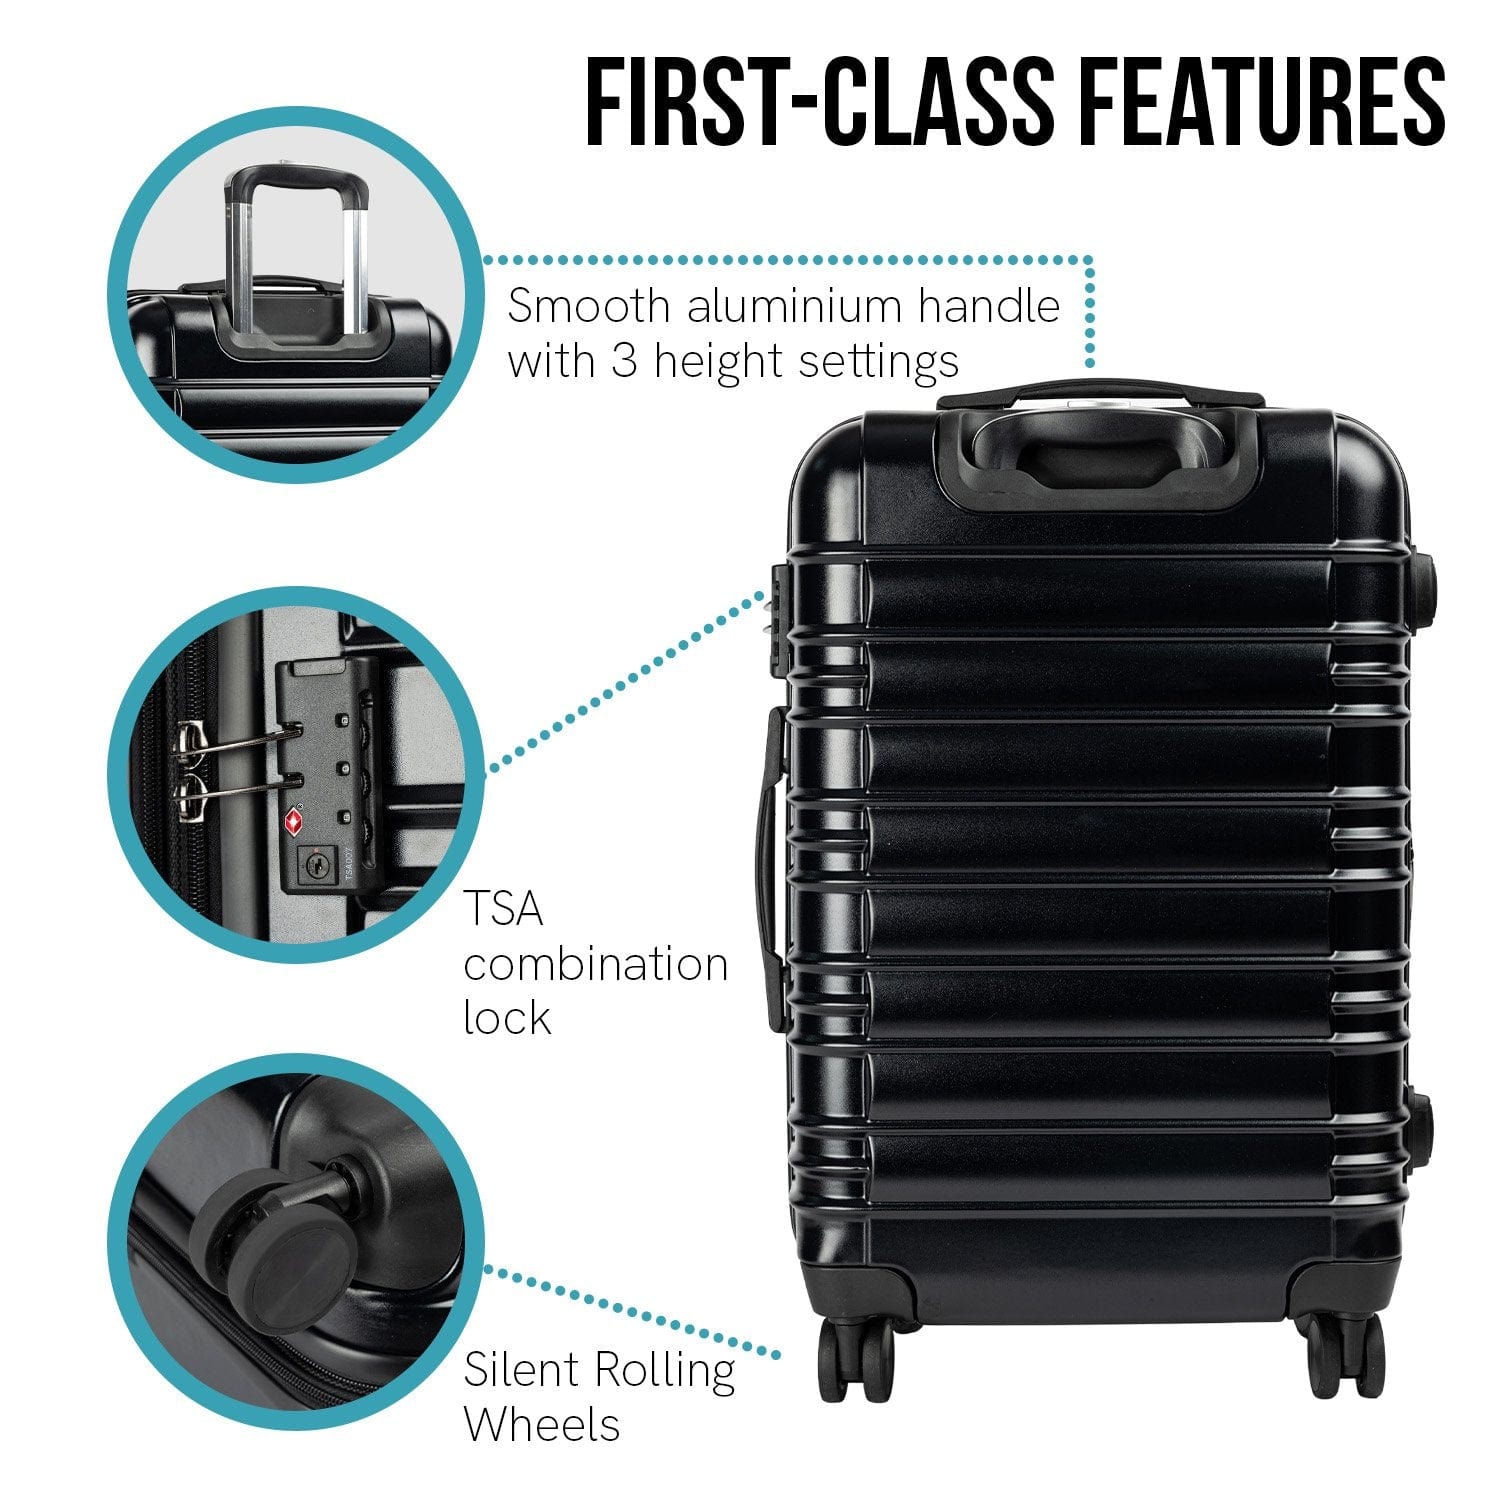 Noctis Suitcase 28in Hard Shell ABS+PC - Stygian Black